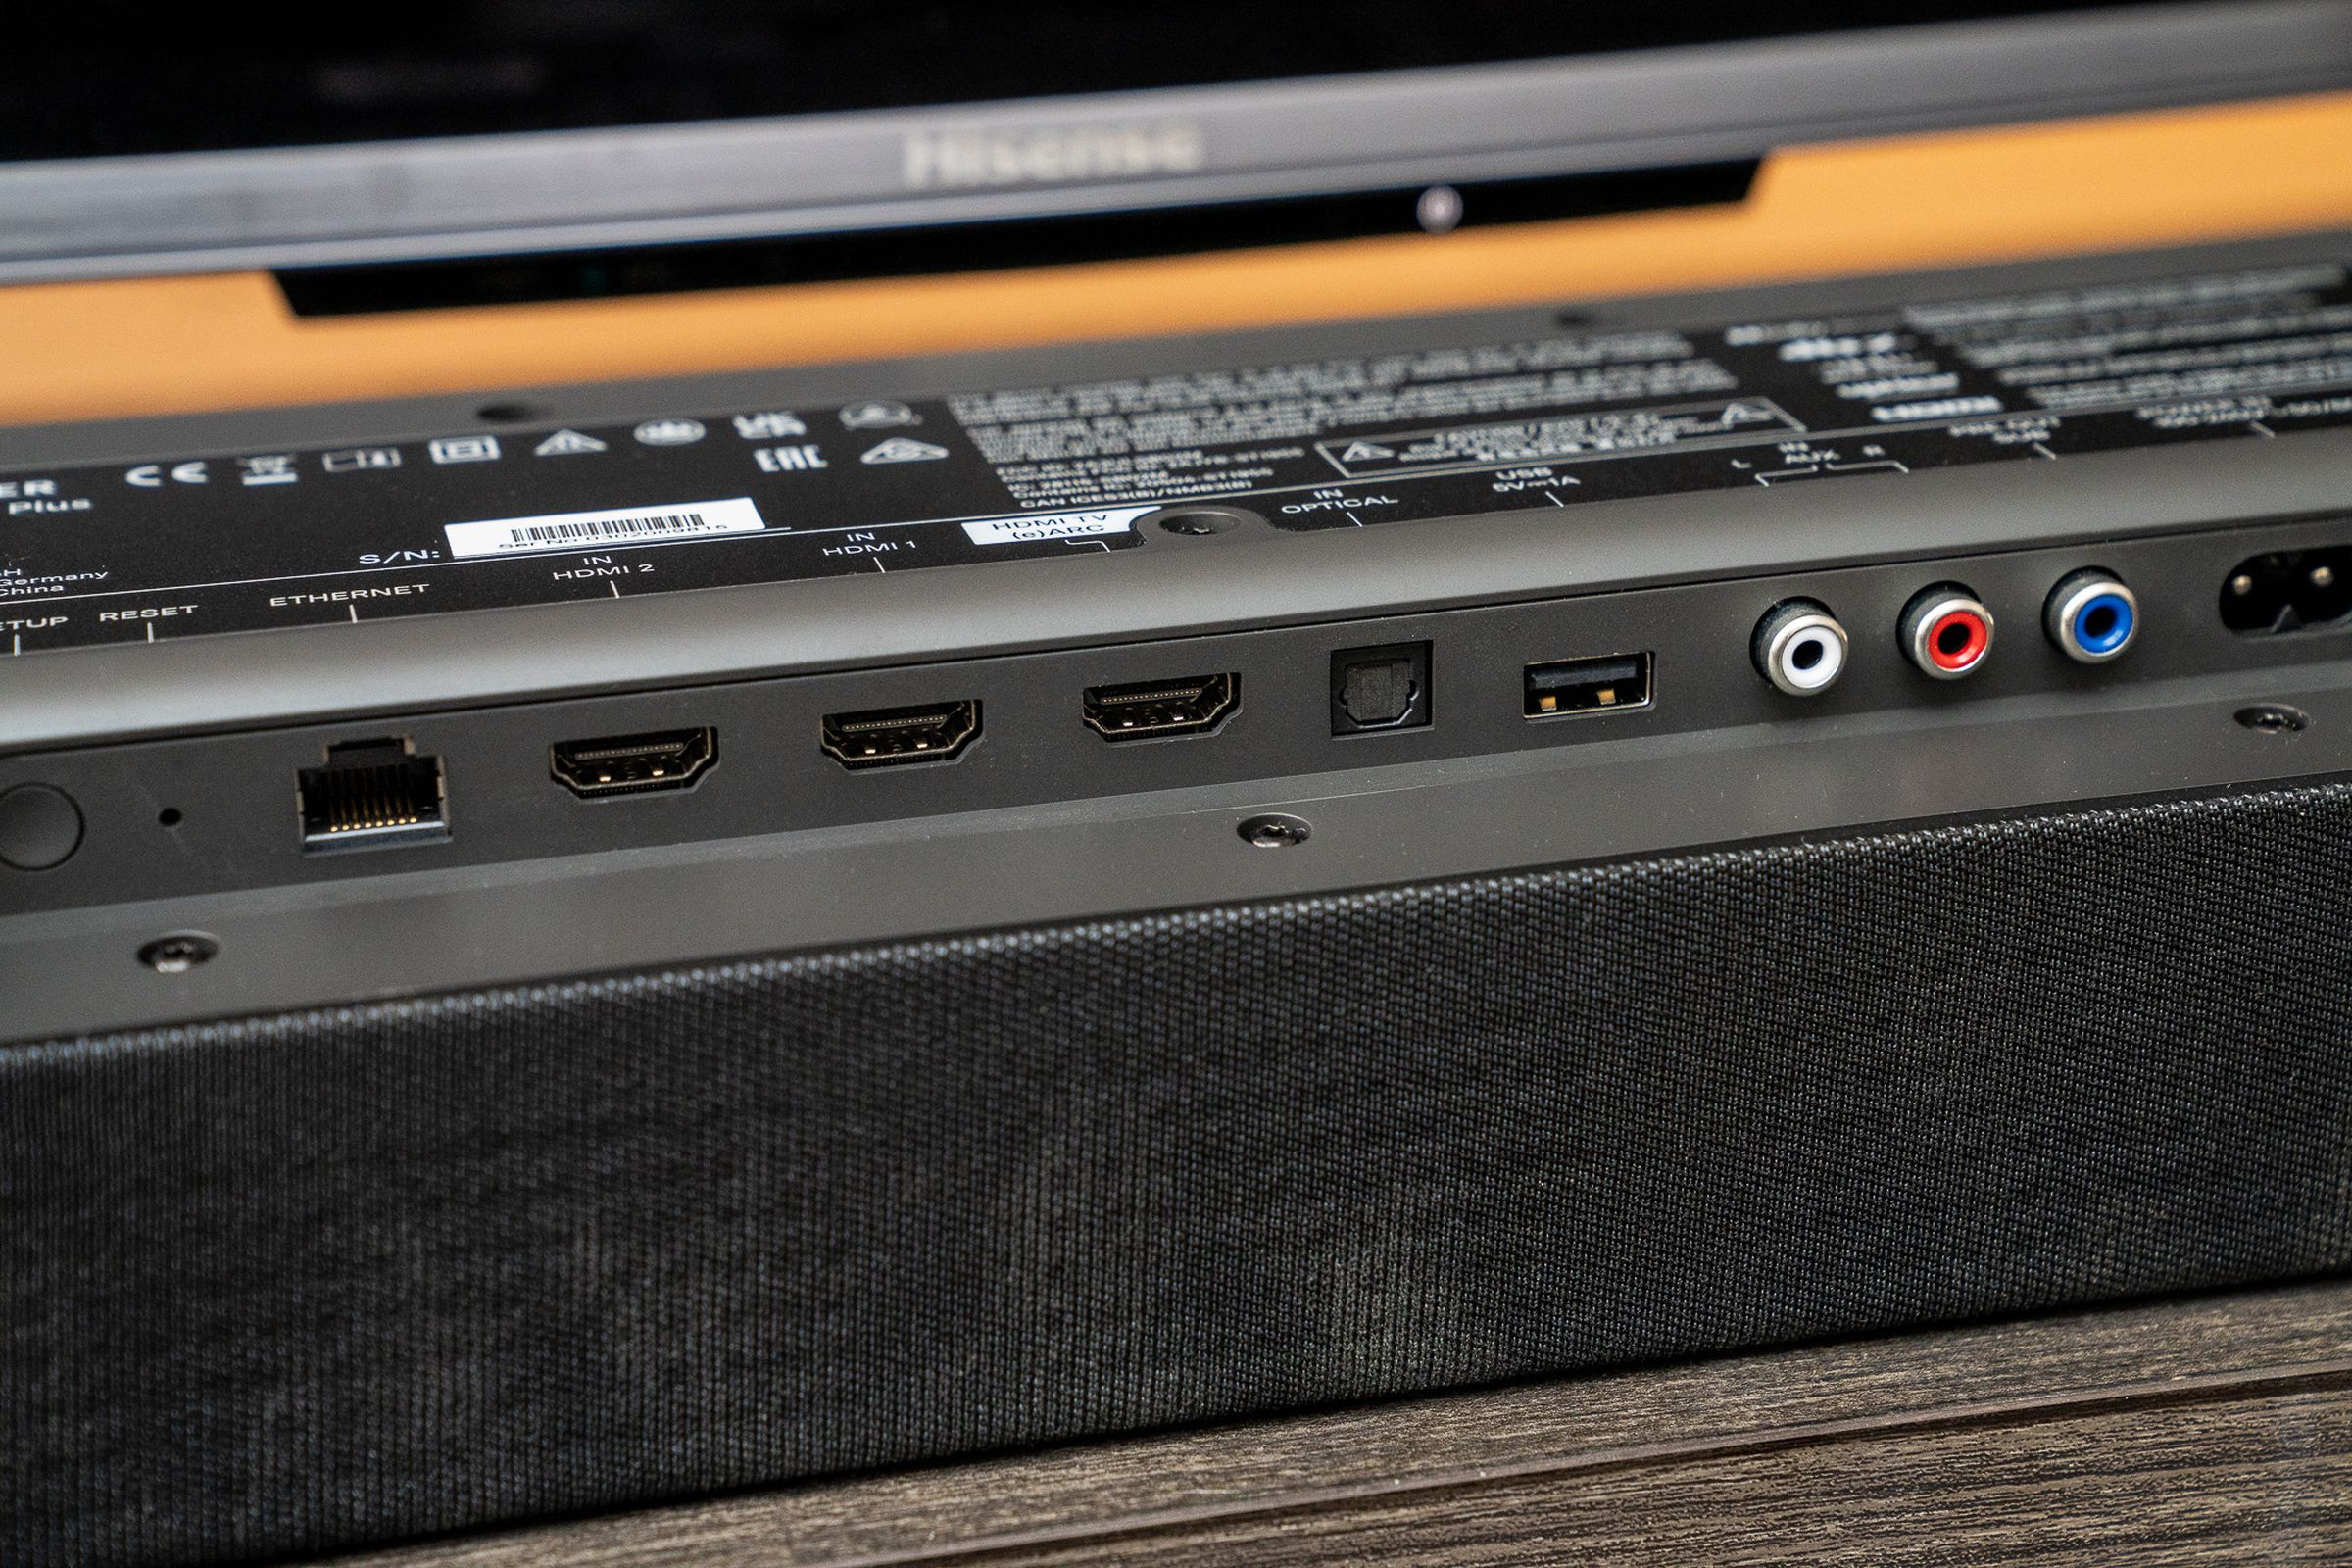 A photo of Sennheiser’s Ambeo Soundbar Plus and related accessories.